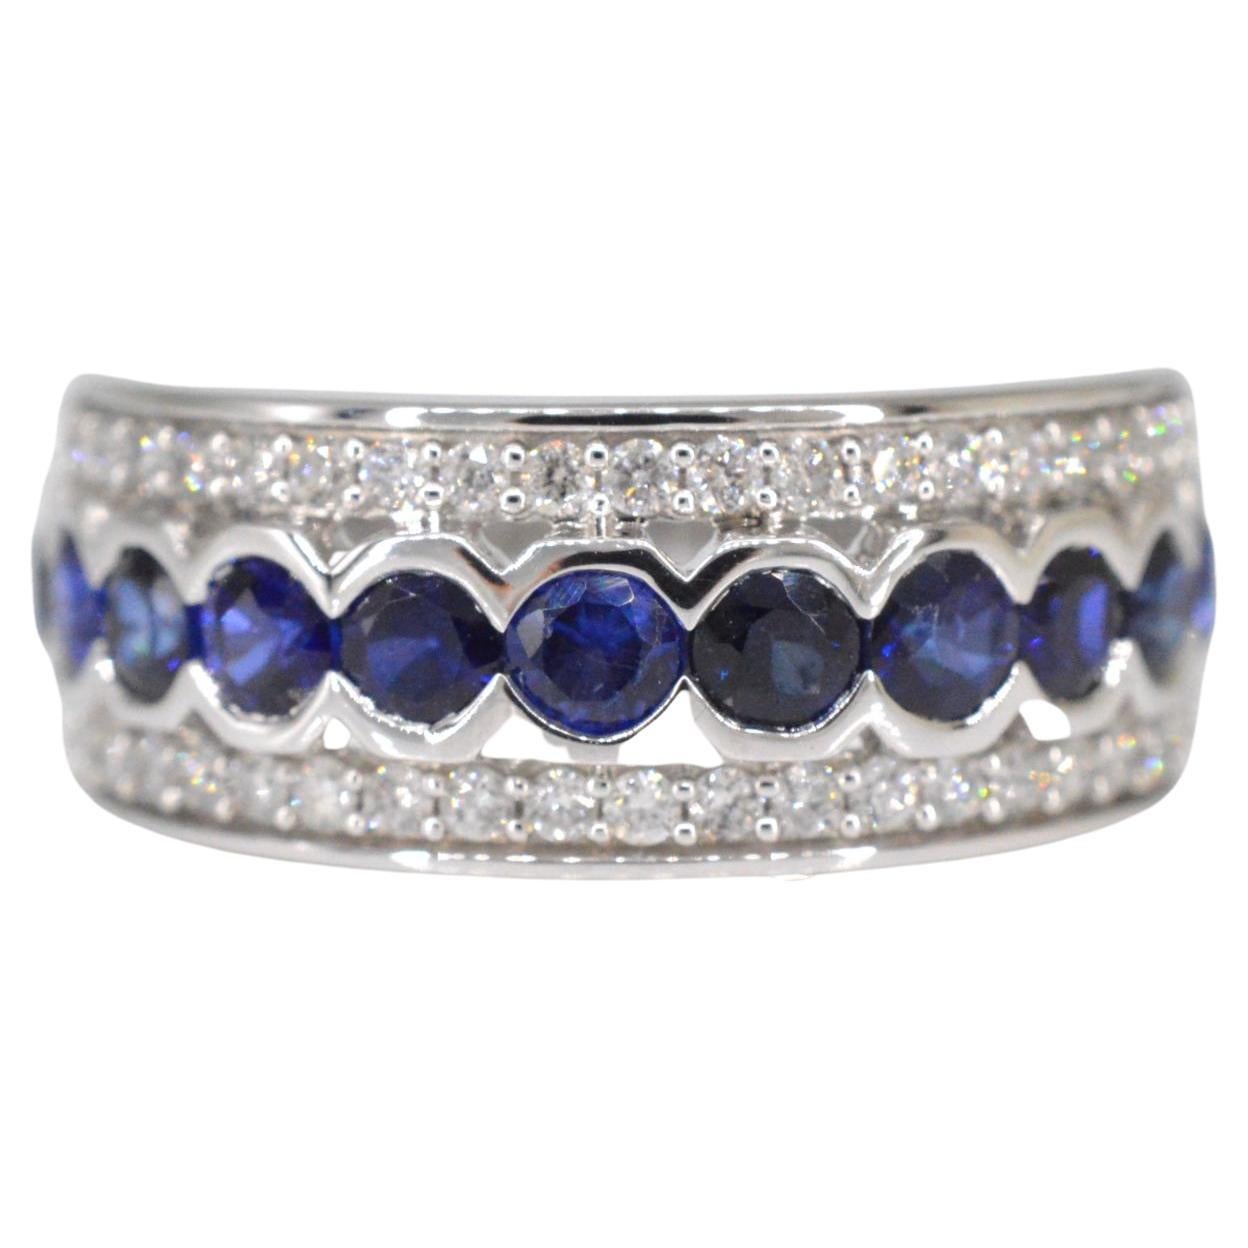 White gold pave ring with diamonds and sapphire